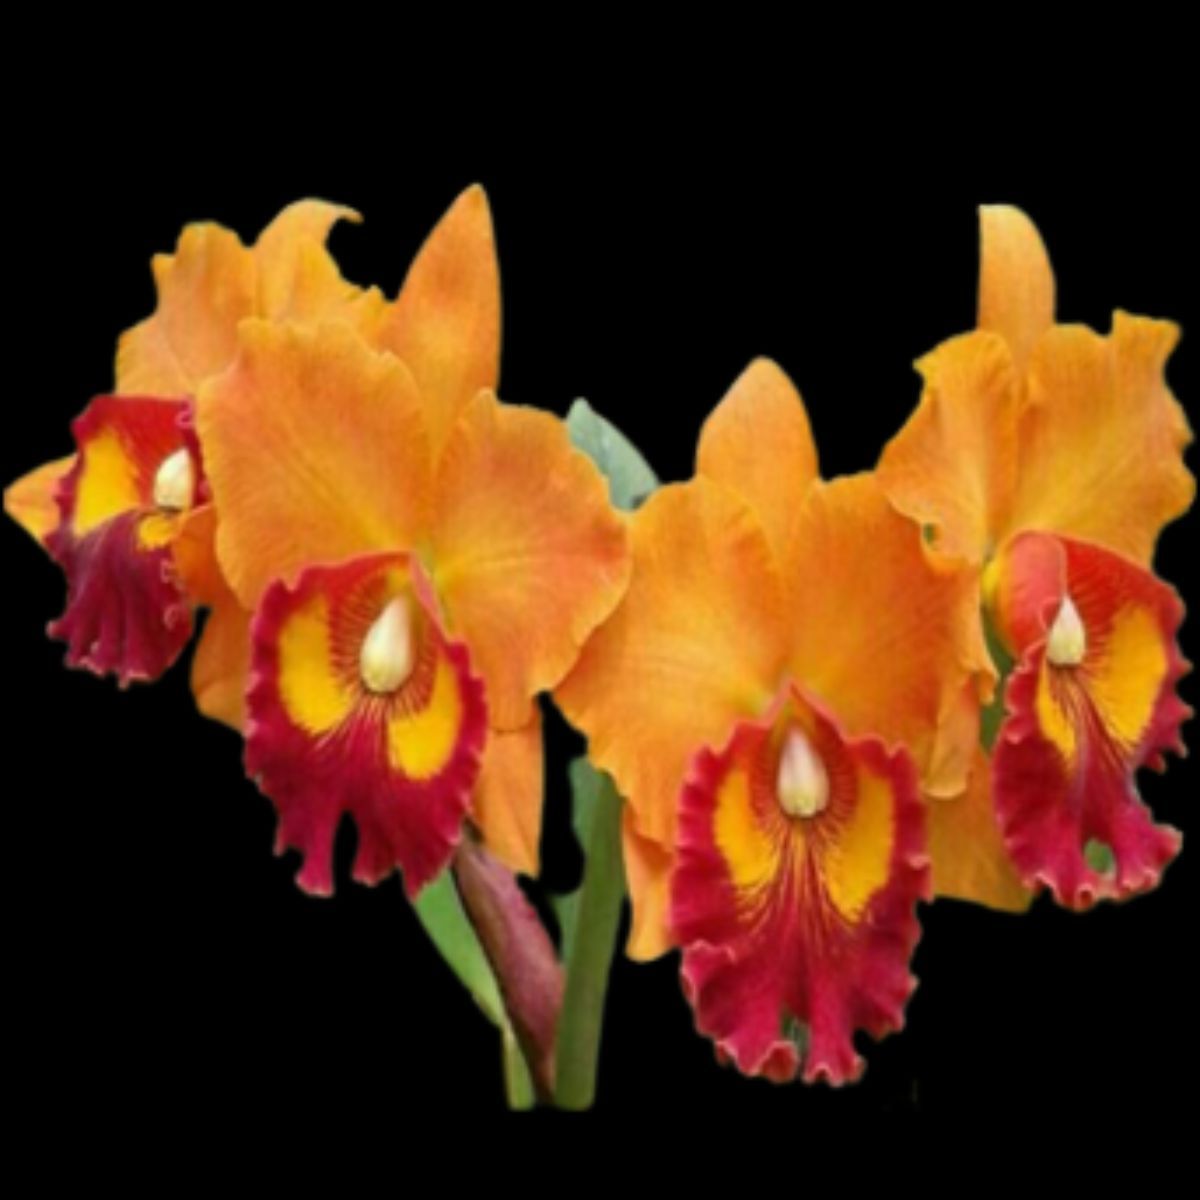 BLC Tawan Chai Orchid Plant - Exquisite Beauty in Blossoming Blooms